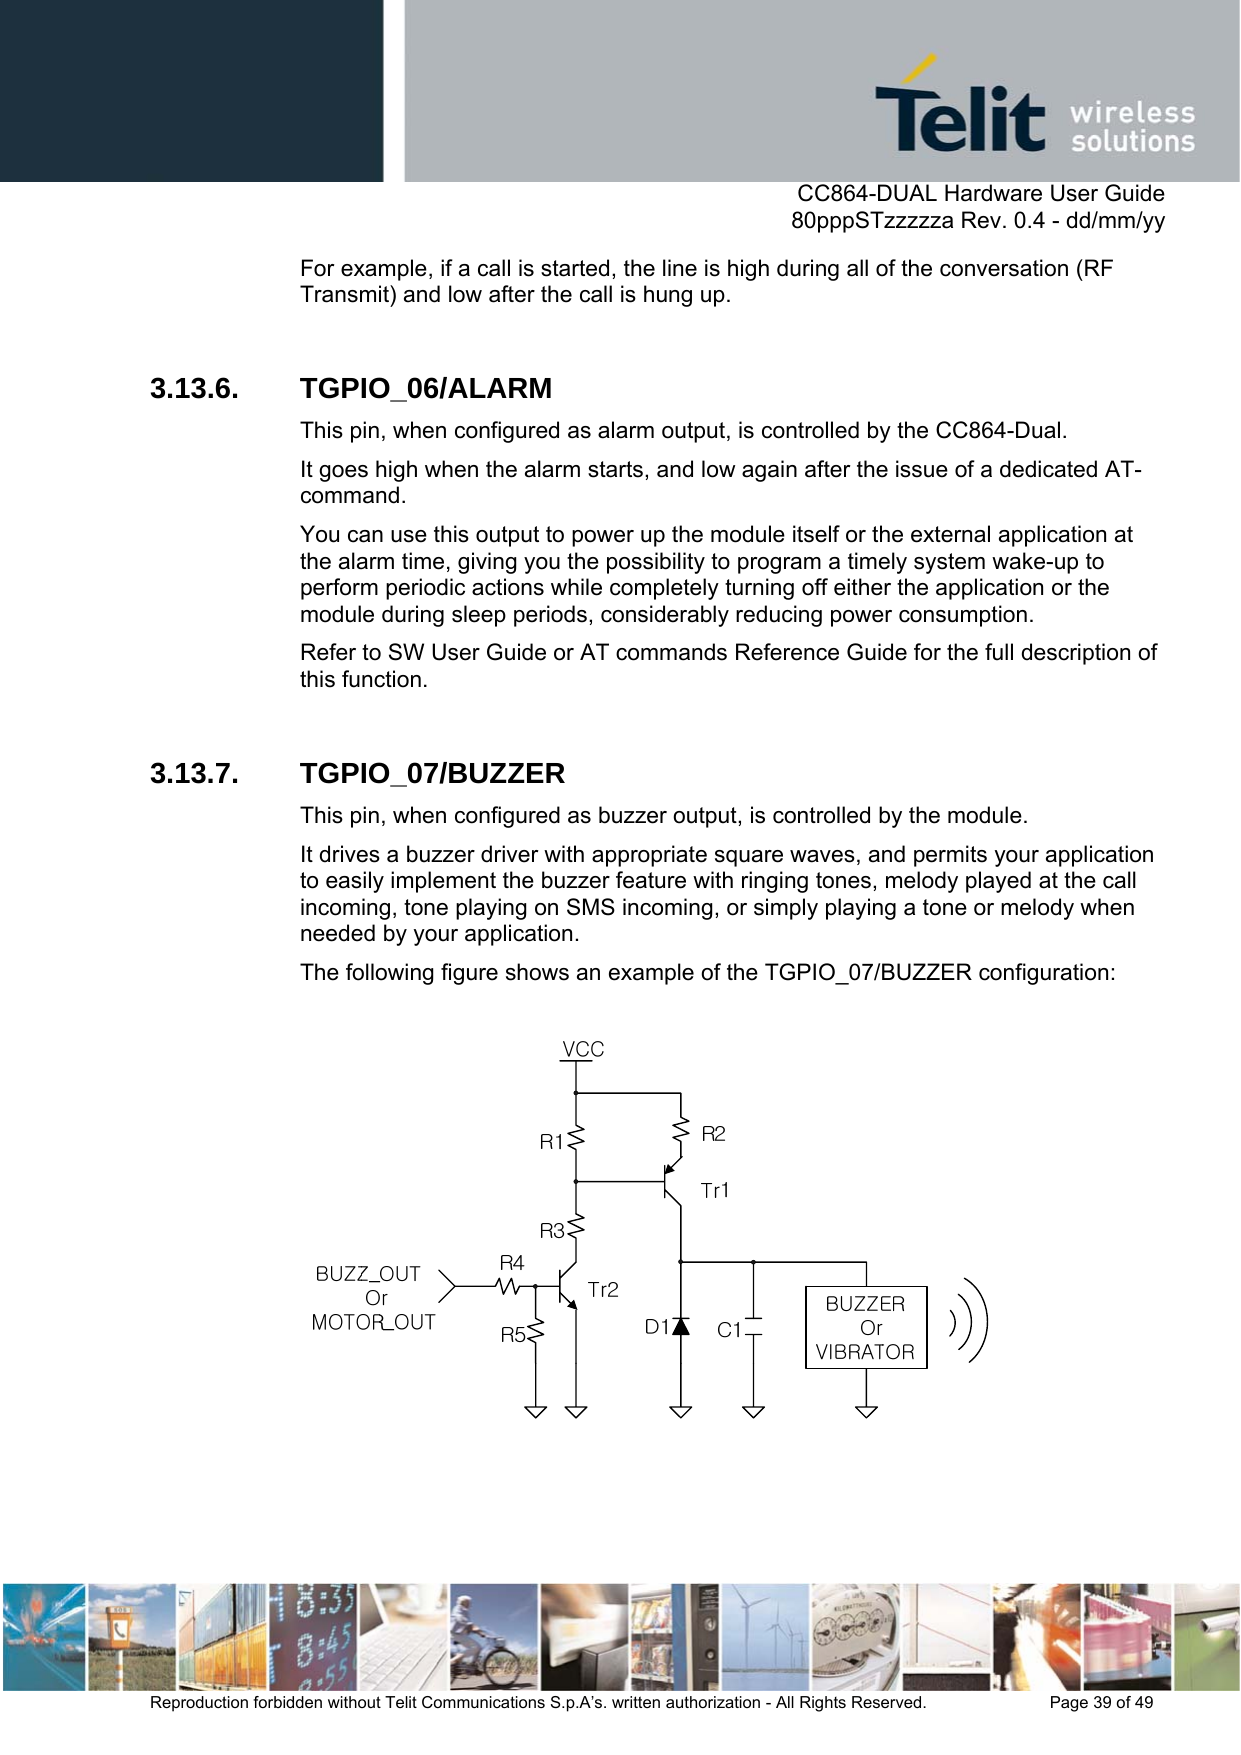      CC864-DUAL Hardware User Guide   80pppSTzzzzza Rev. 0.4 - dd/mm/yy   Reproduction forbidden without Telit Communications S.p.A’s. written authorization - All Rights Reserved.    Page 39 of 49  For example, if a call is started, the line is high during all of the conversation (RF Transmit) and low after the call is hung up.  3.13.6. TGPIO_06/ALARM This pin, when configured as alarm output, is controlled by the CC864-Dual.  It goes high when the alarm starts, and low again after the issue of a dedicated AT-command.  You can use this output to power up the module itself or the external application at the alarm time, giving you the possibility to program a timely system wake-up to perform periodic actions while completely turning off either the application or the module during sleep periods, considerably reducing power consumption. Refer to SW User Guide or AT commands Reference Guide for the full description of this function.   3.13.7. TGPIO_07/BUZZER This pin, when configured as buzzer output, is controlled by the module.  It drives a buzzer driver with appropriate square waves, and permits your application to easily implement the buzzer feature with ringing tones, melody played at the call incoming, tone playing on SMS incoming, or simply playing a tone or melody when needed by your application. The following figure shows an example of the TGPIO_07/BUZZER configuration:    